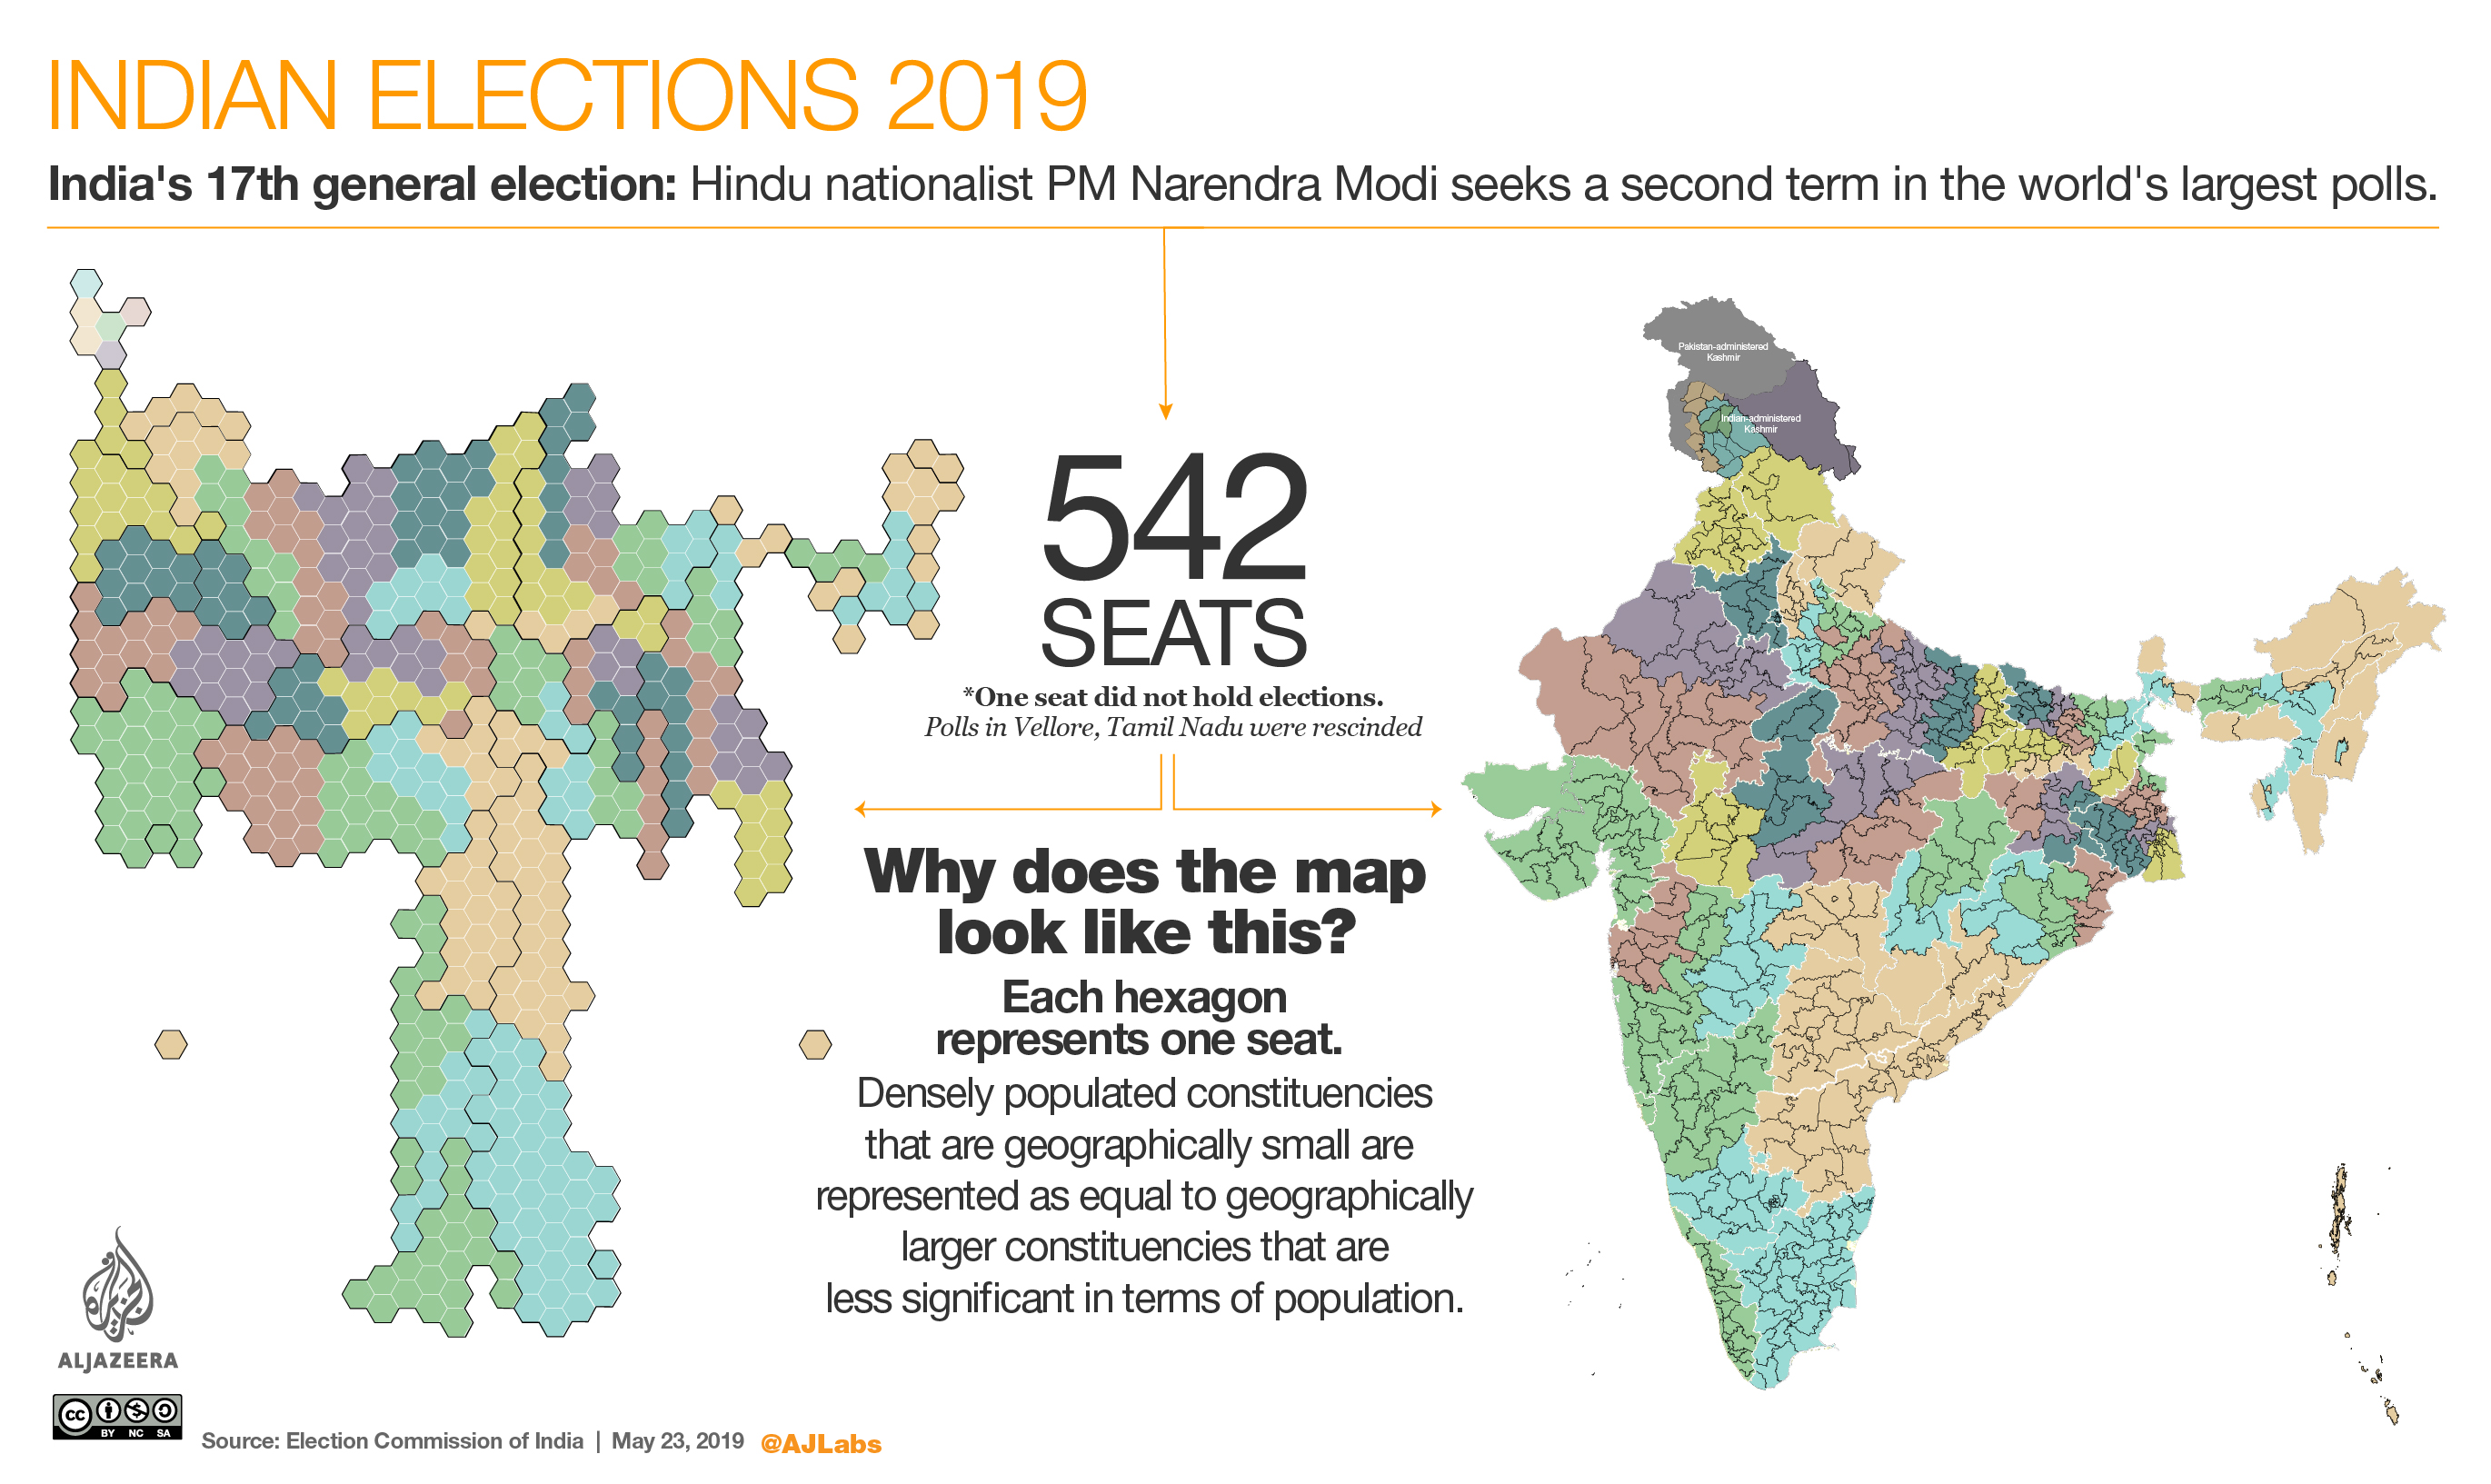 INTERACTIVE: Indian elections 2019  - Why does the map look this way?